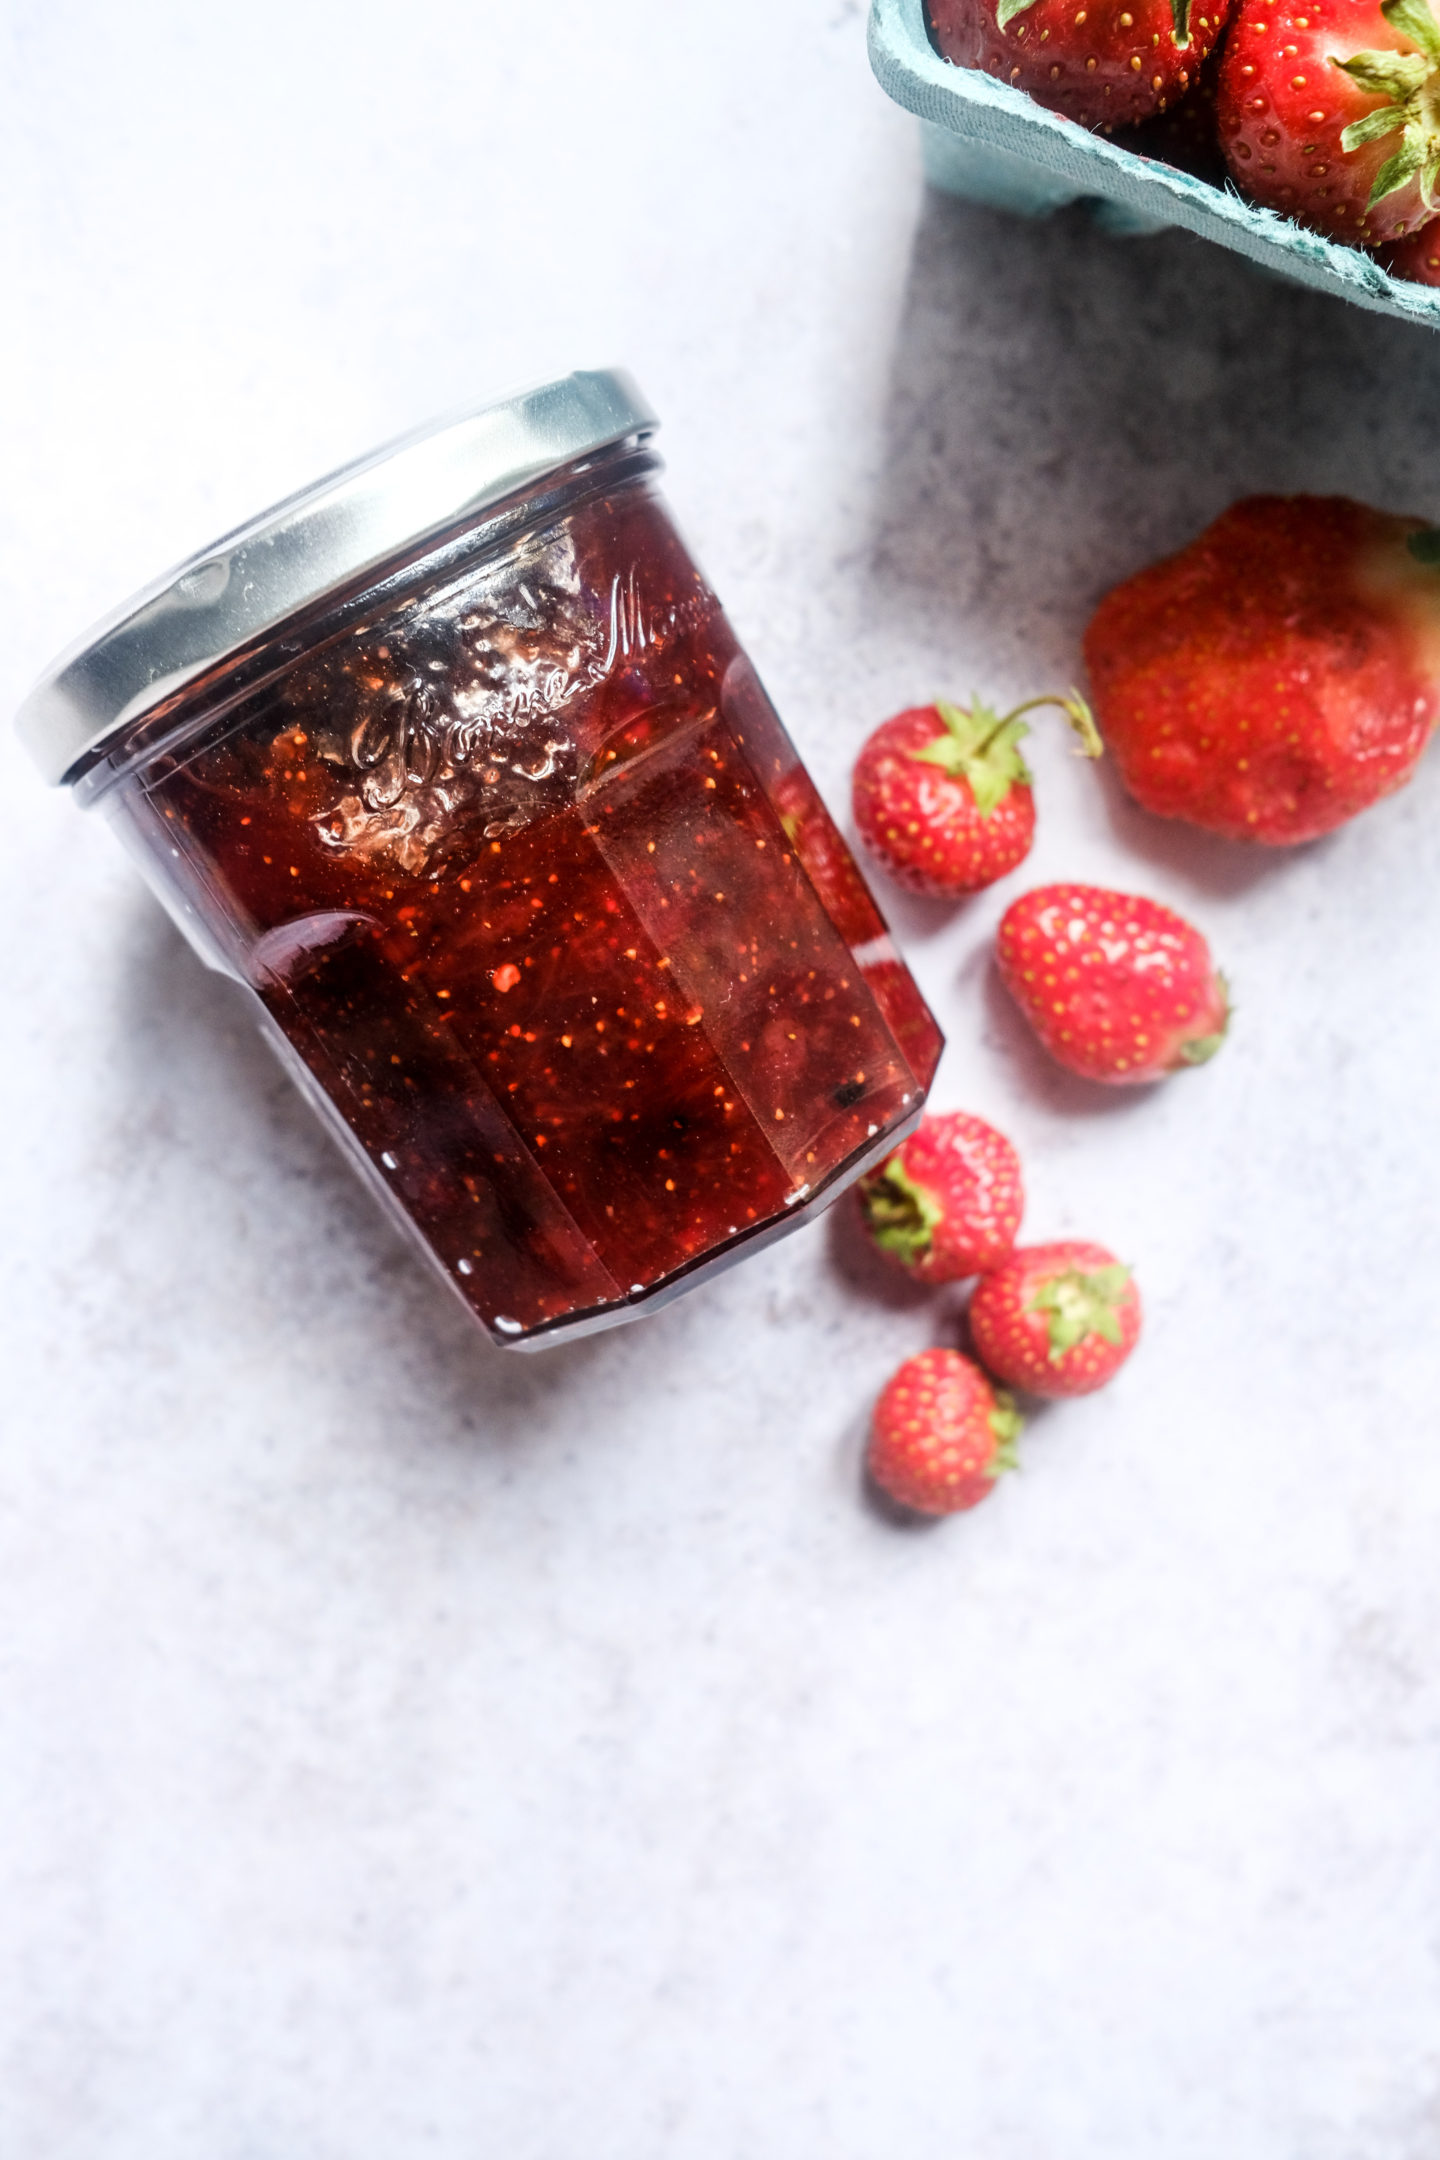 Chocolate and Lace shares her recipe for easy Strawberry Jam